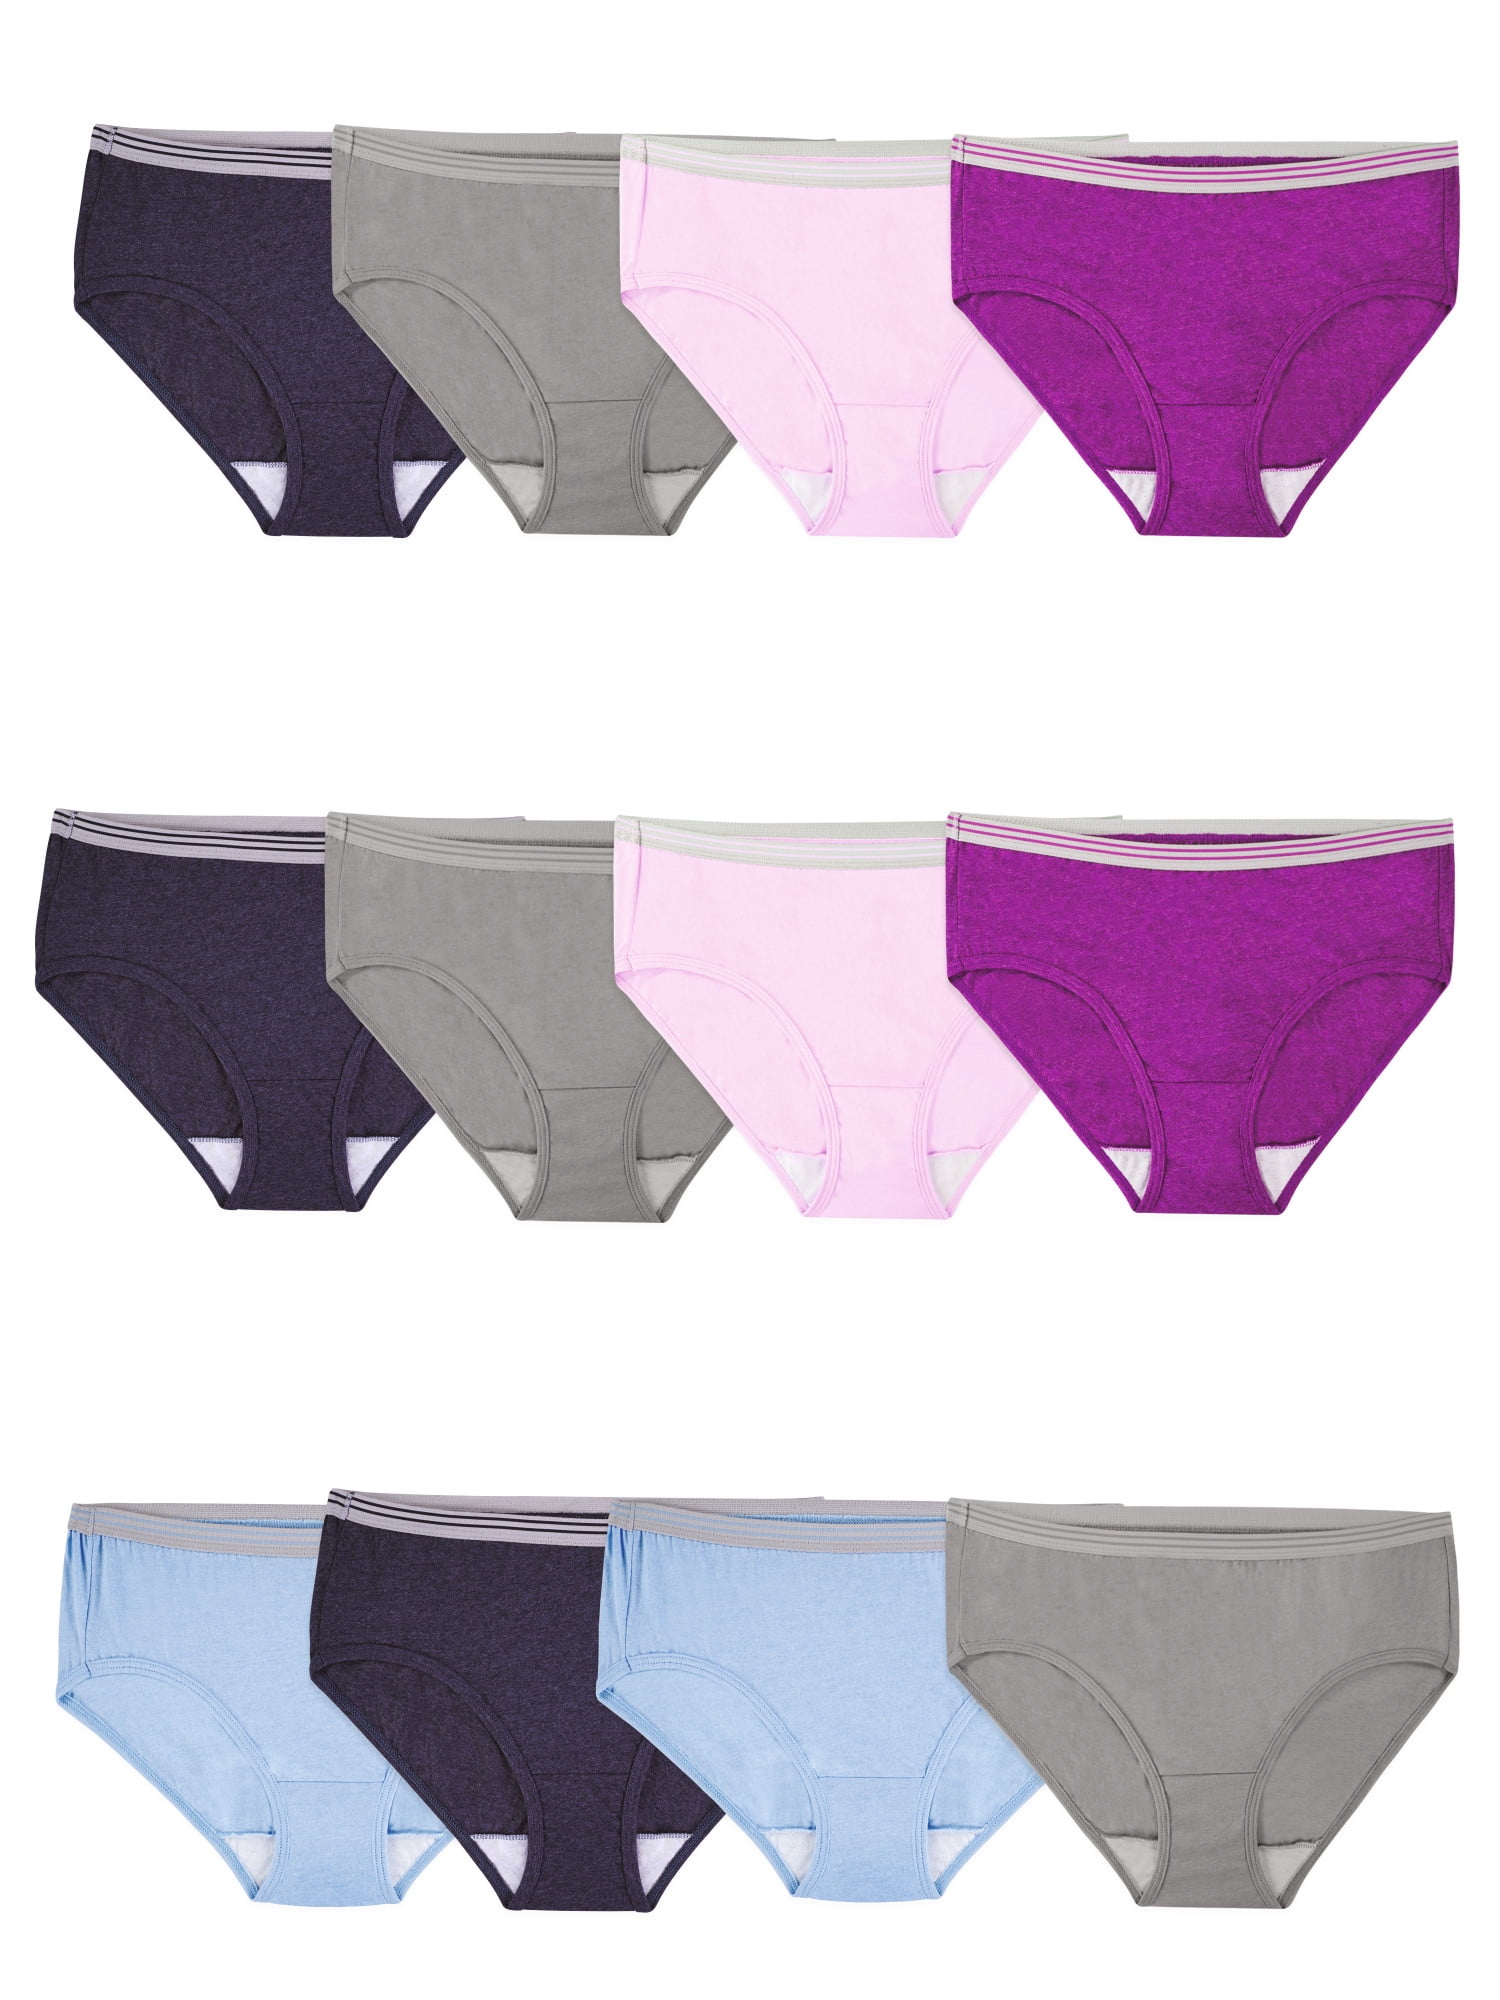 Fruit of the Loom Women's Cotton Heather Assorted Low Rise Brief Underwear,  12 Pack 